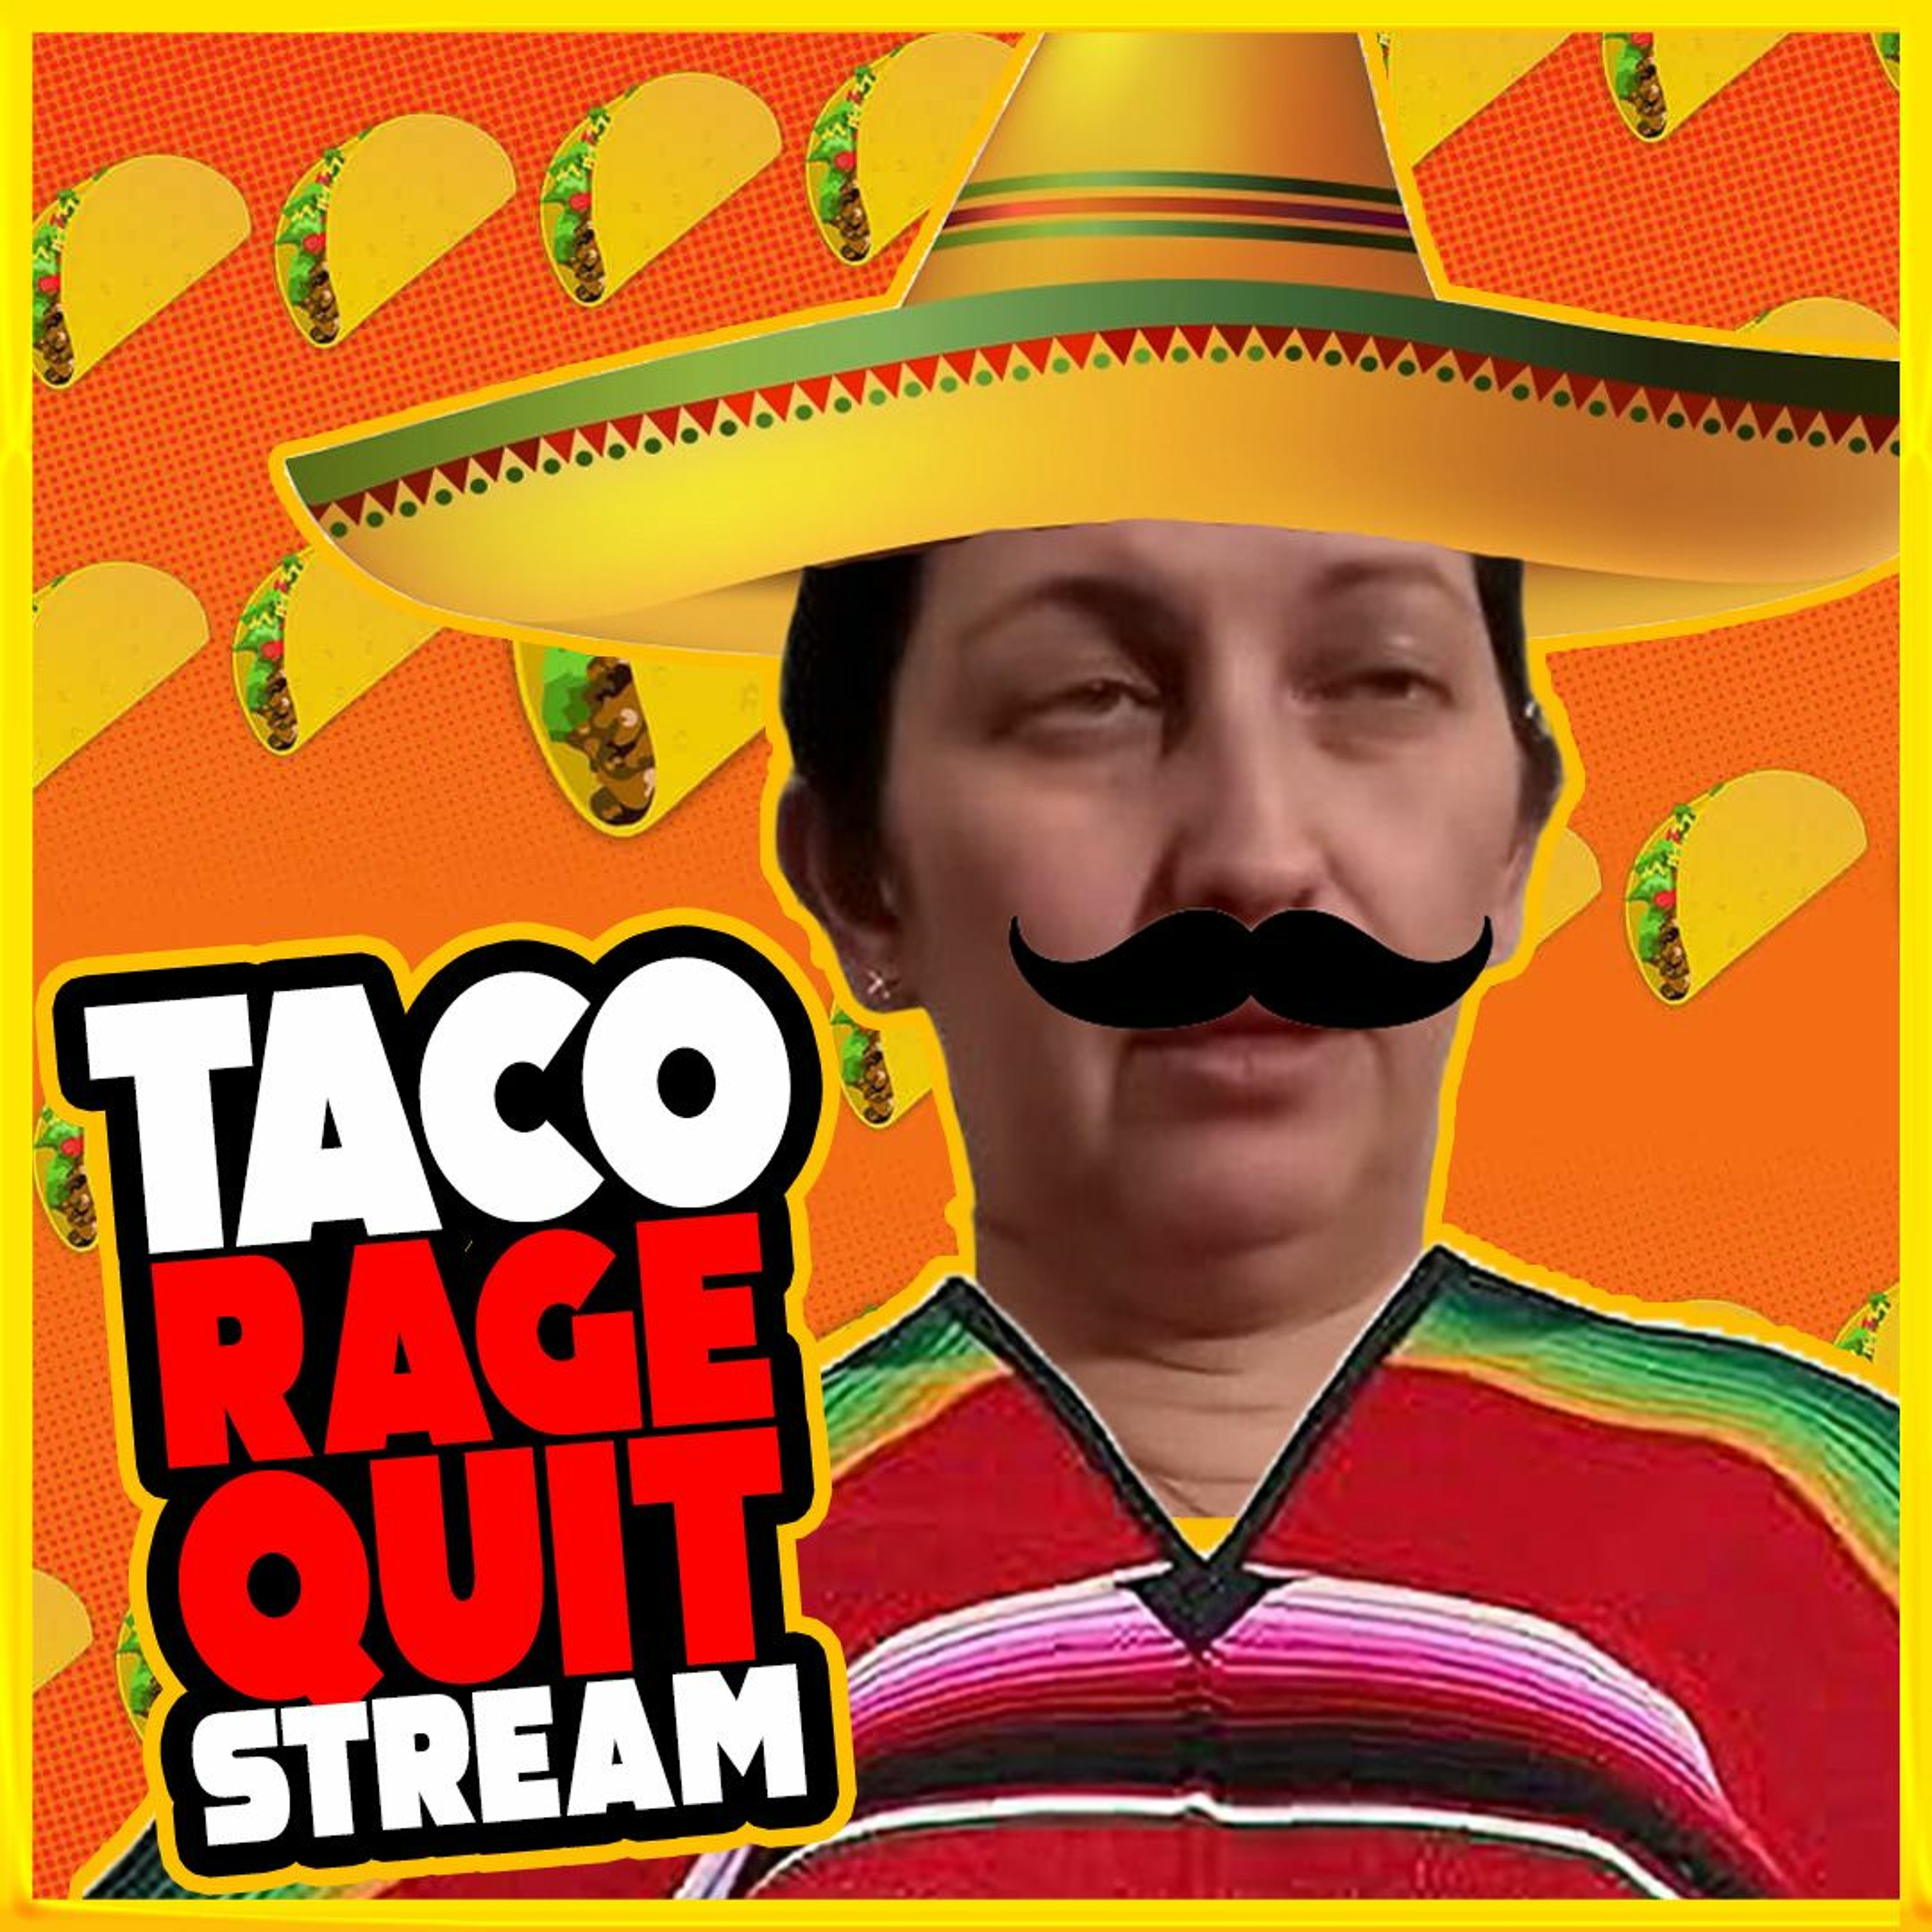 Jessica’s Taco RAGE QUIT Stream - Vince McMahon’s Official RESPONSE - Will TikTok be BANNED? | 1336